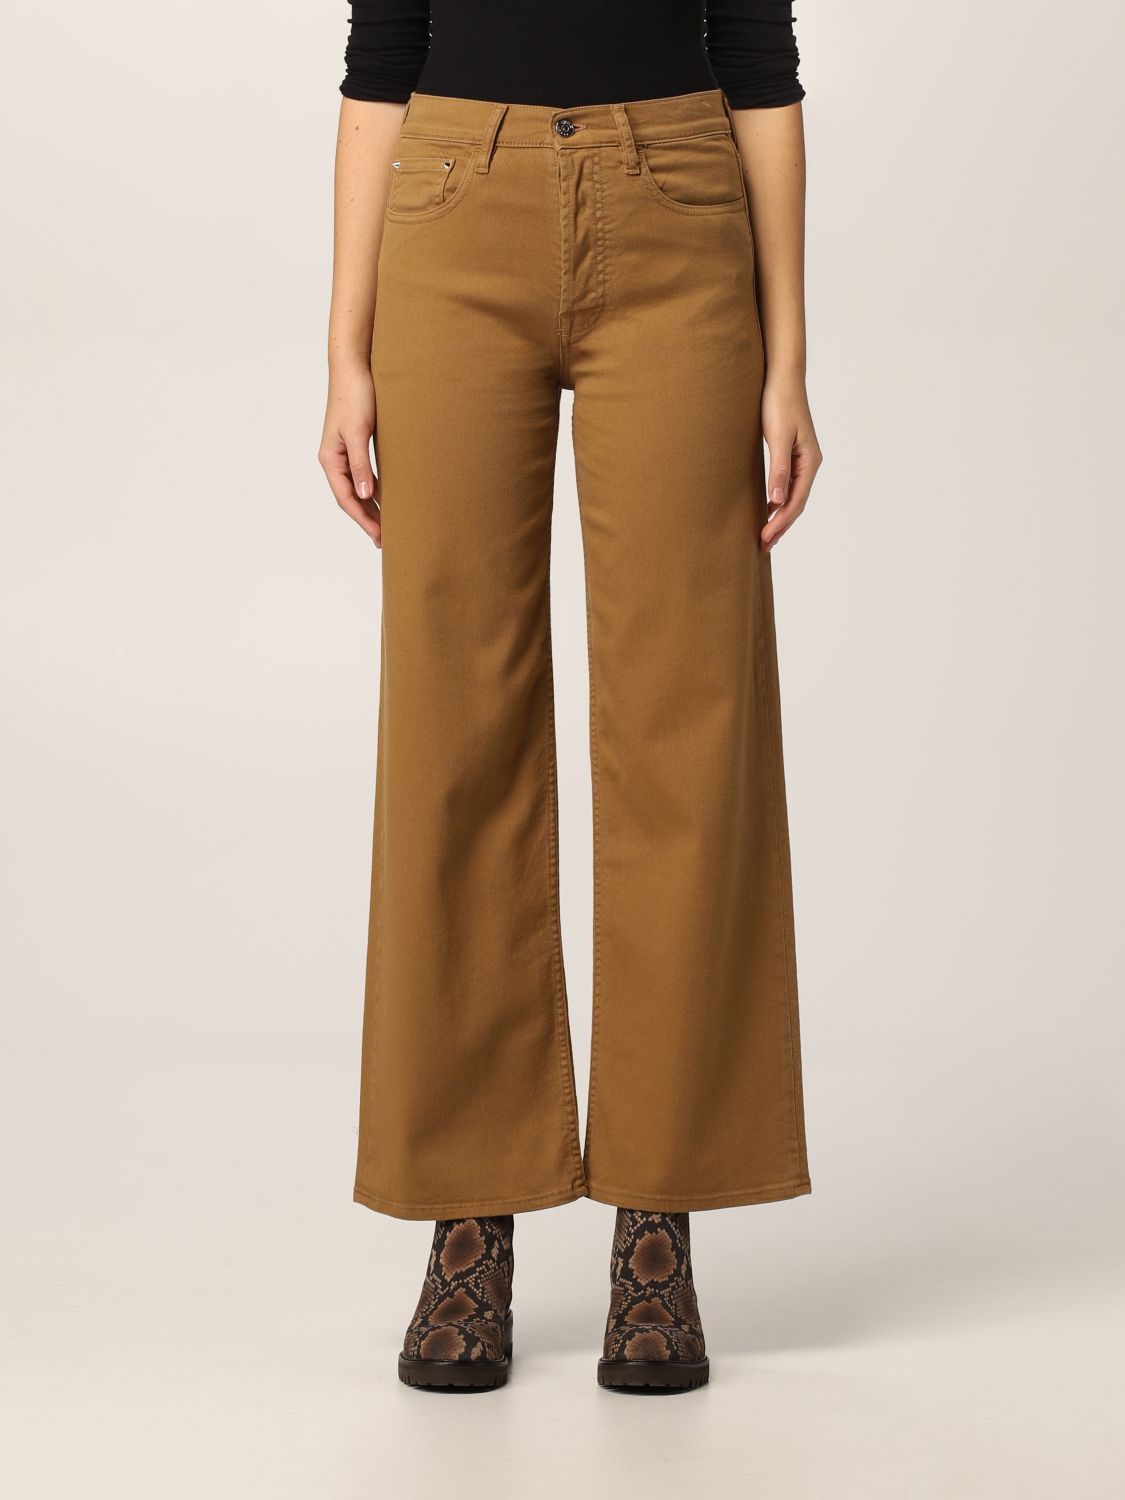 Jeans Cycle: Pants women Cycle camel 1